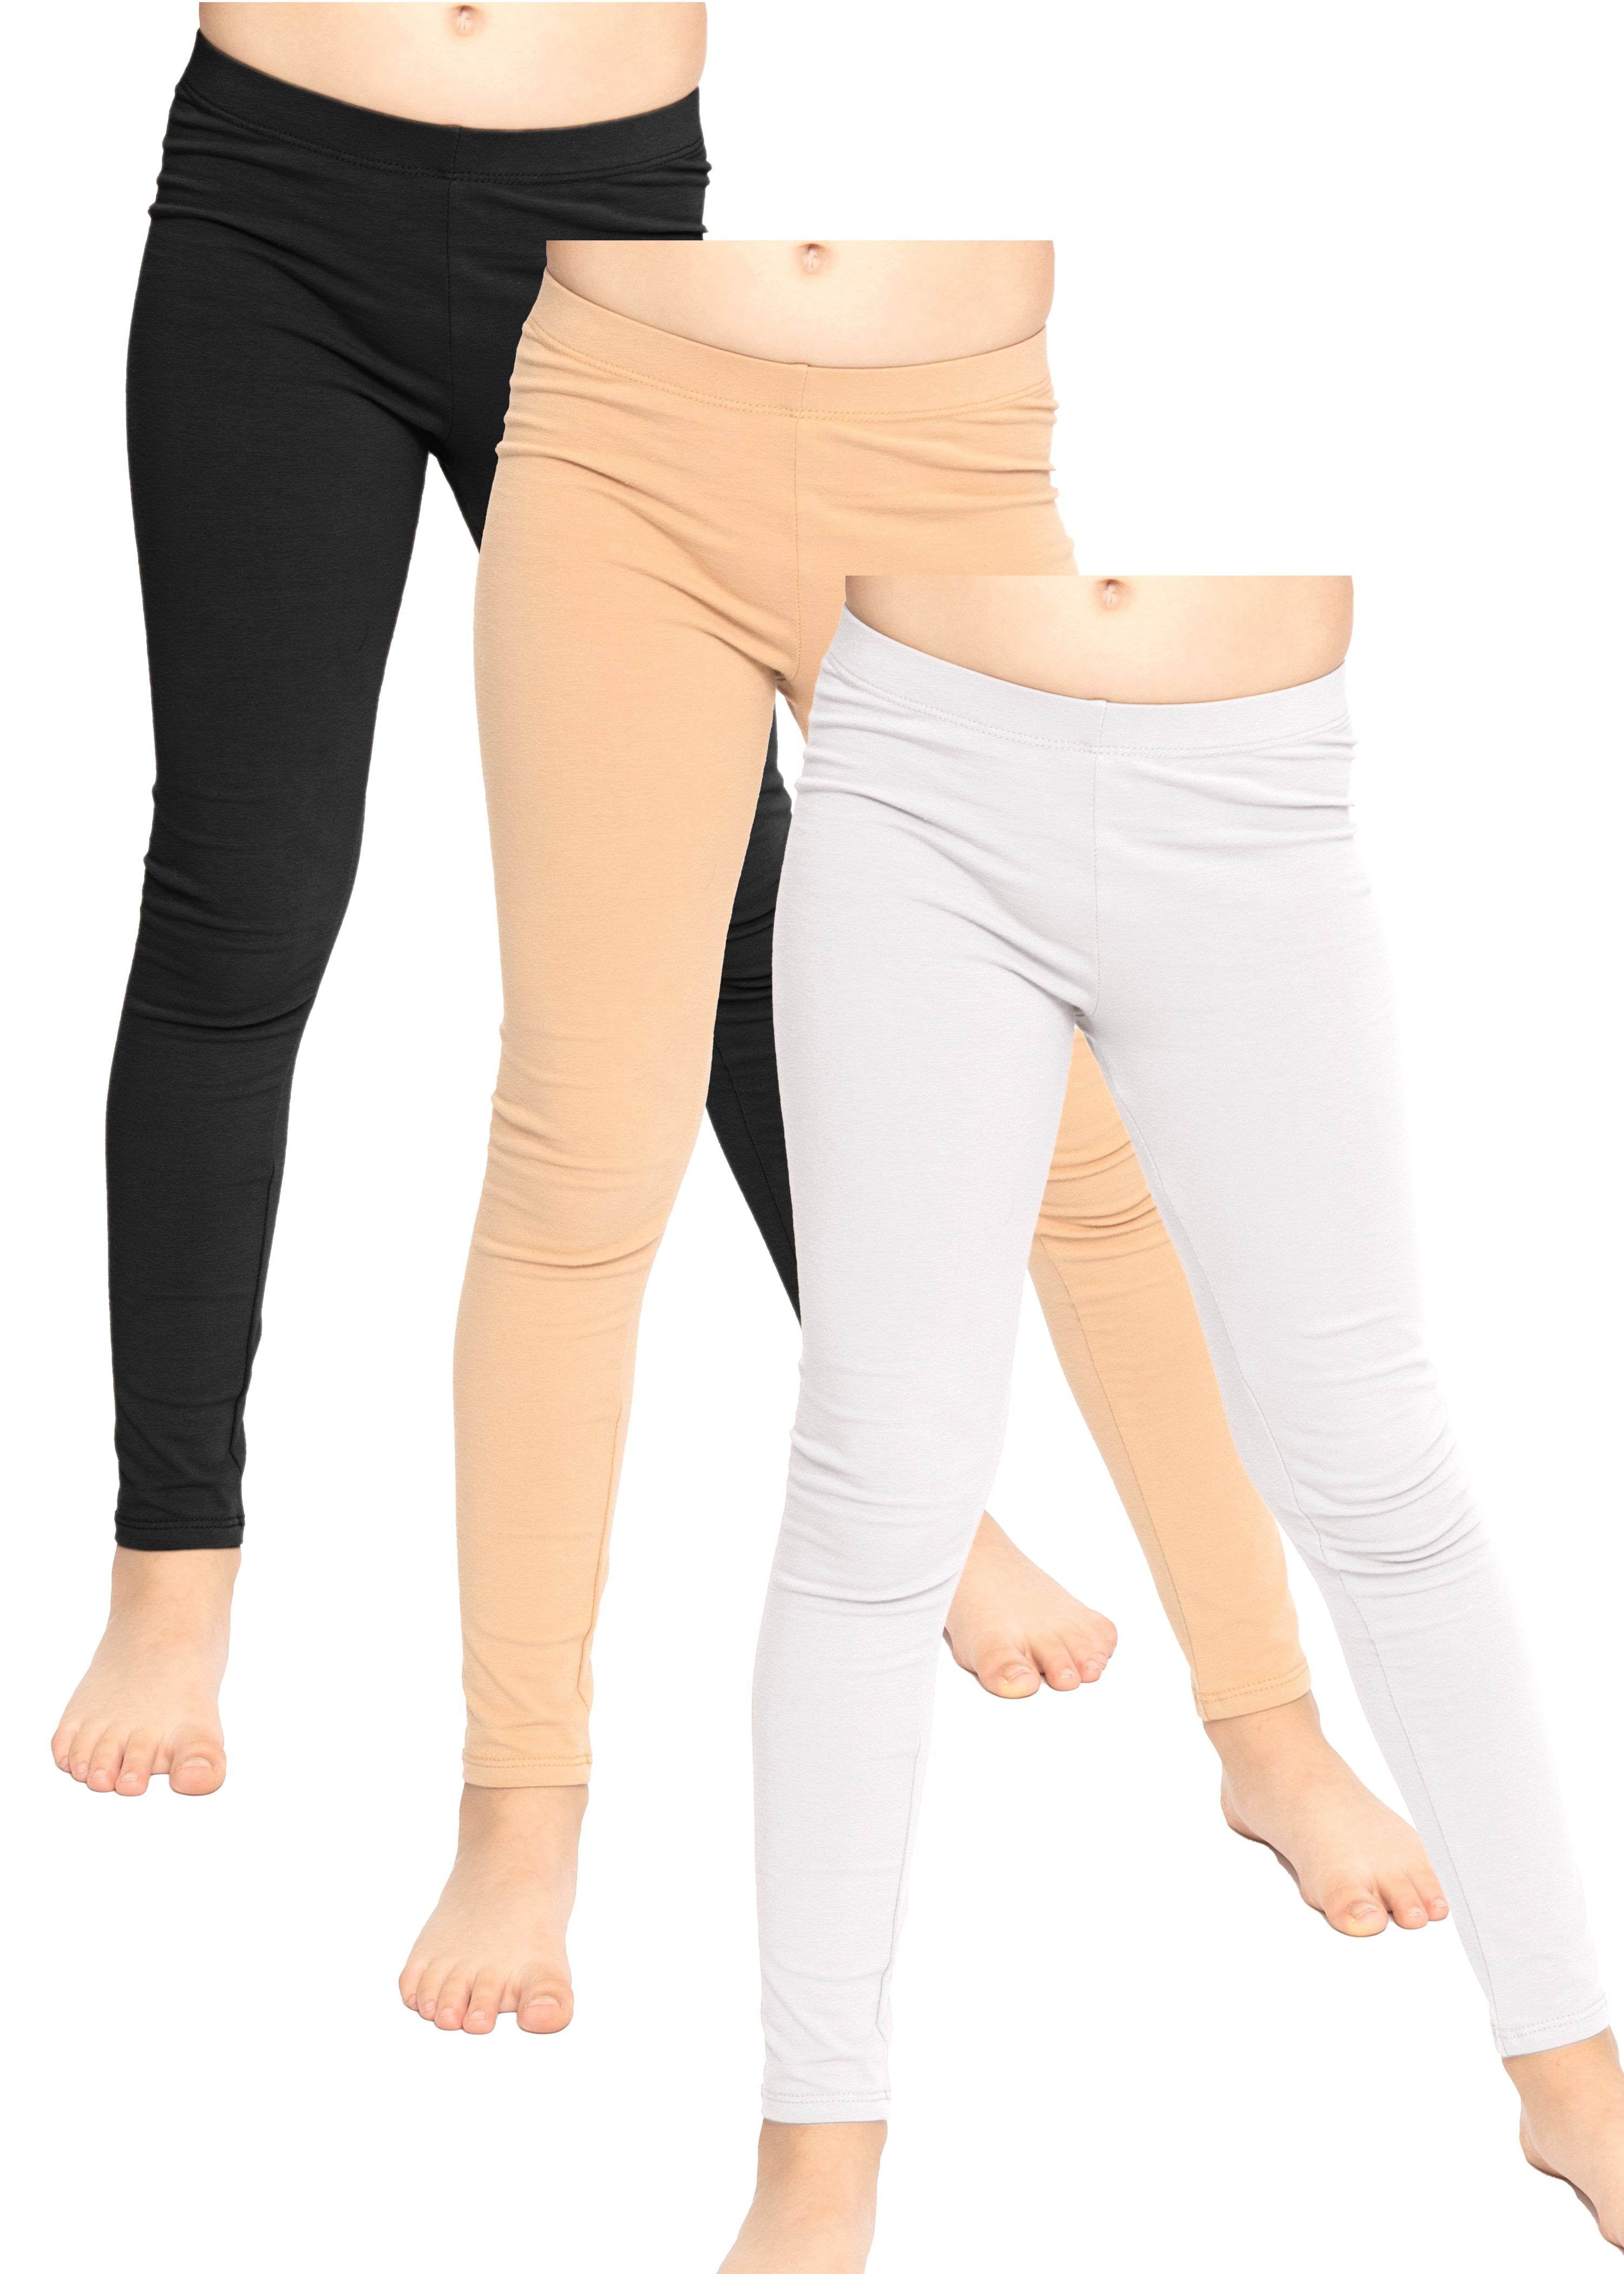 Stretch Is Comfort Girl's Cotton Footless Leggings